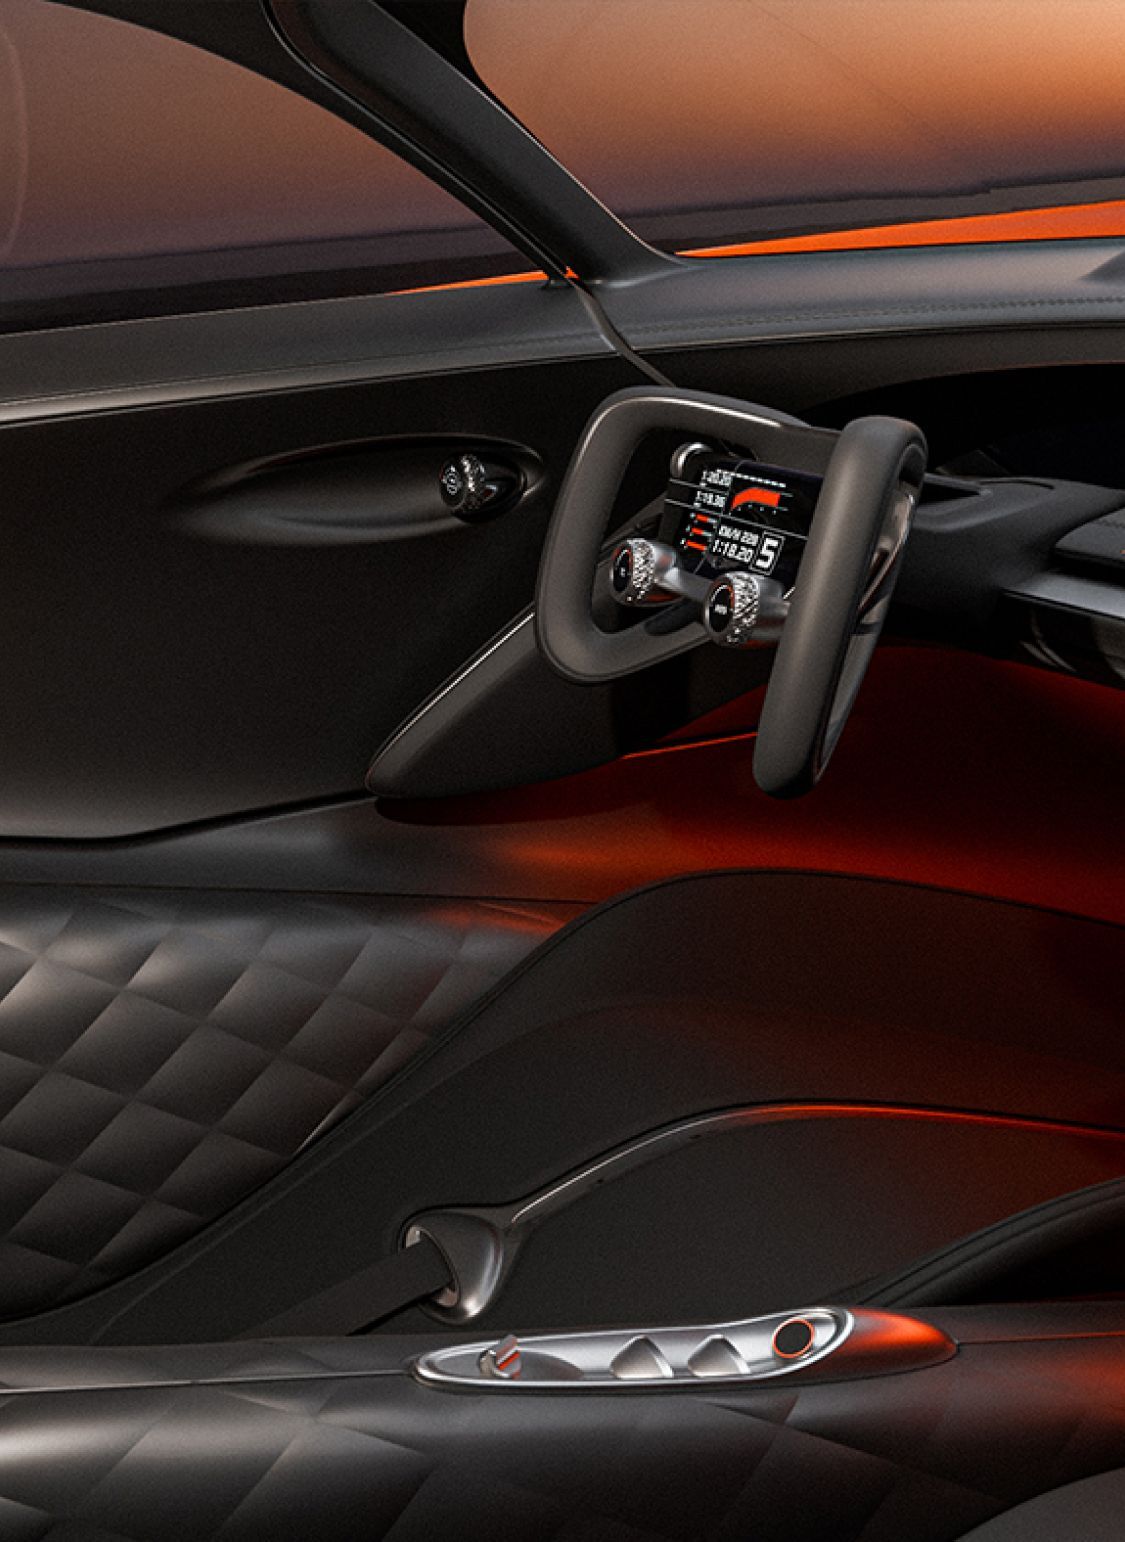 From the passenger seat, the view of the X Gran Berlinetta Concept’s driver’s seat is revealed. The interior is elegantly designed in black and silver, accented by a touch of fiery orange lighting. The steering wheel, featuring a central monitor and ribbon-like handles on either side, epitomizes modern sophistication.